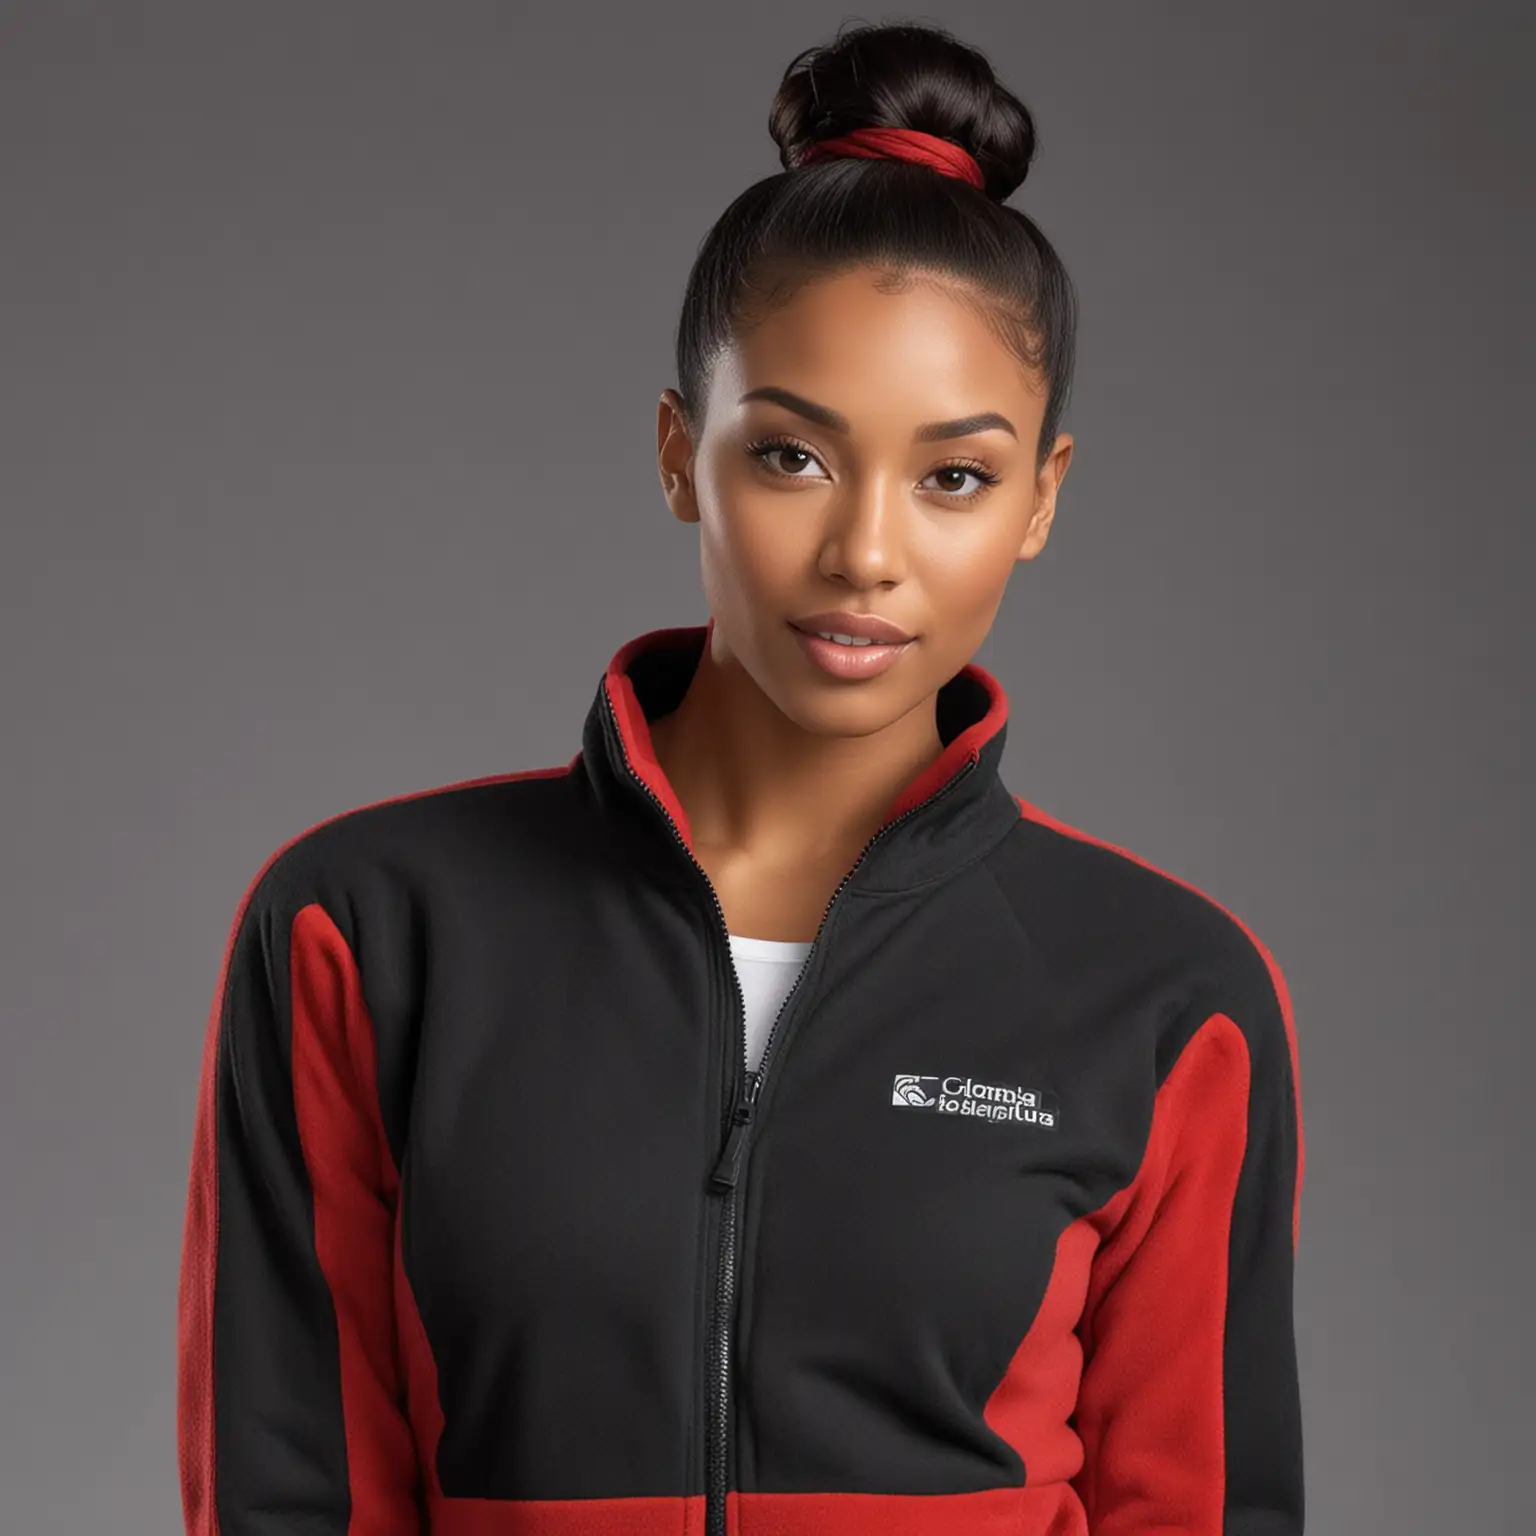 AfricanAmerican Female Model in Red Columbia Jacket